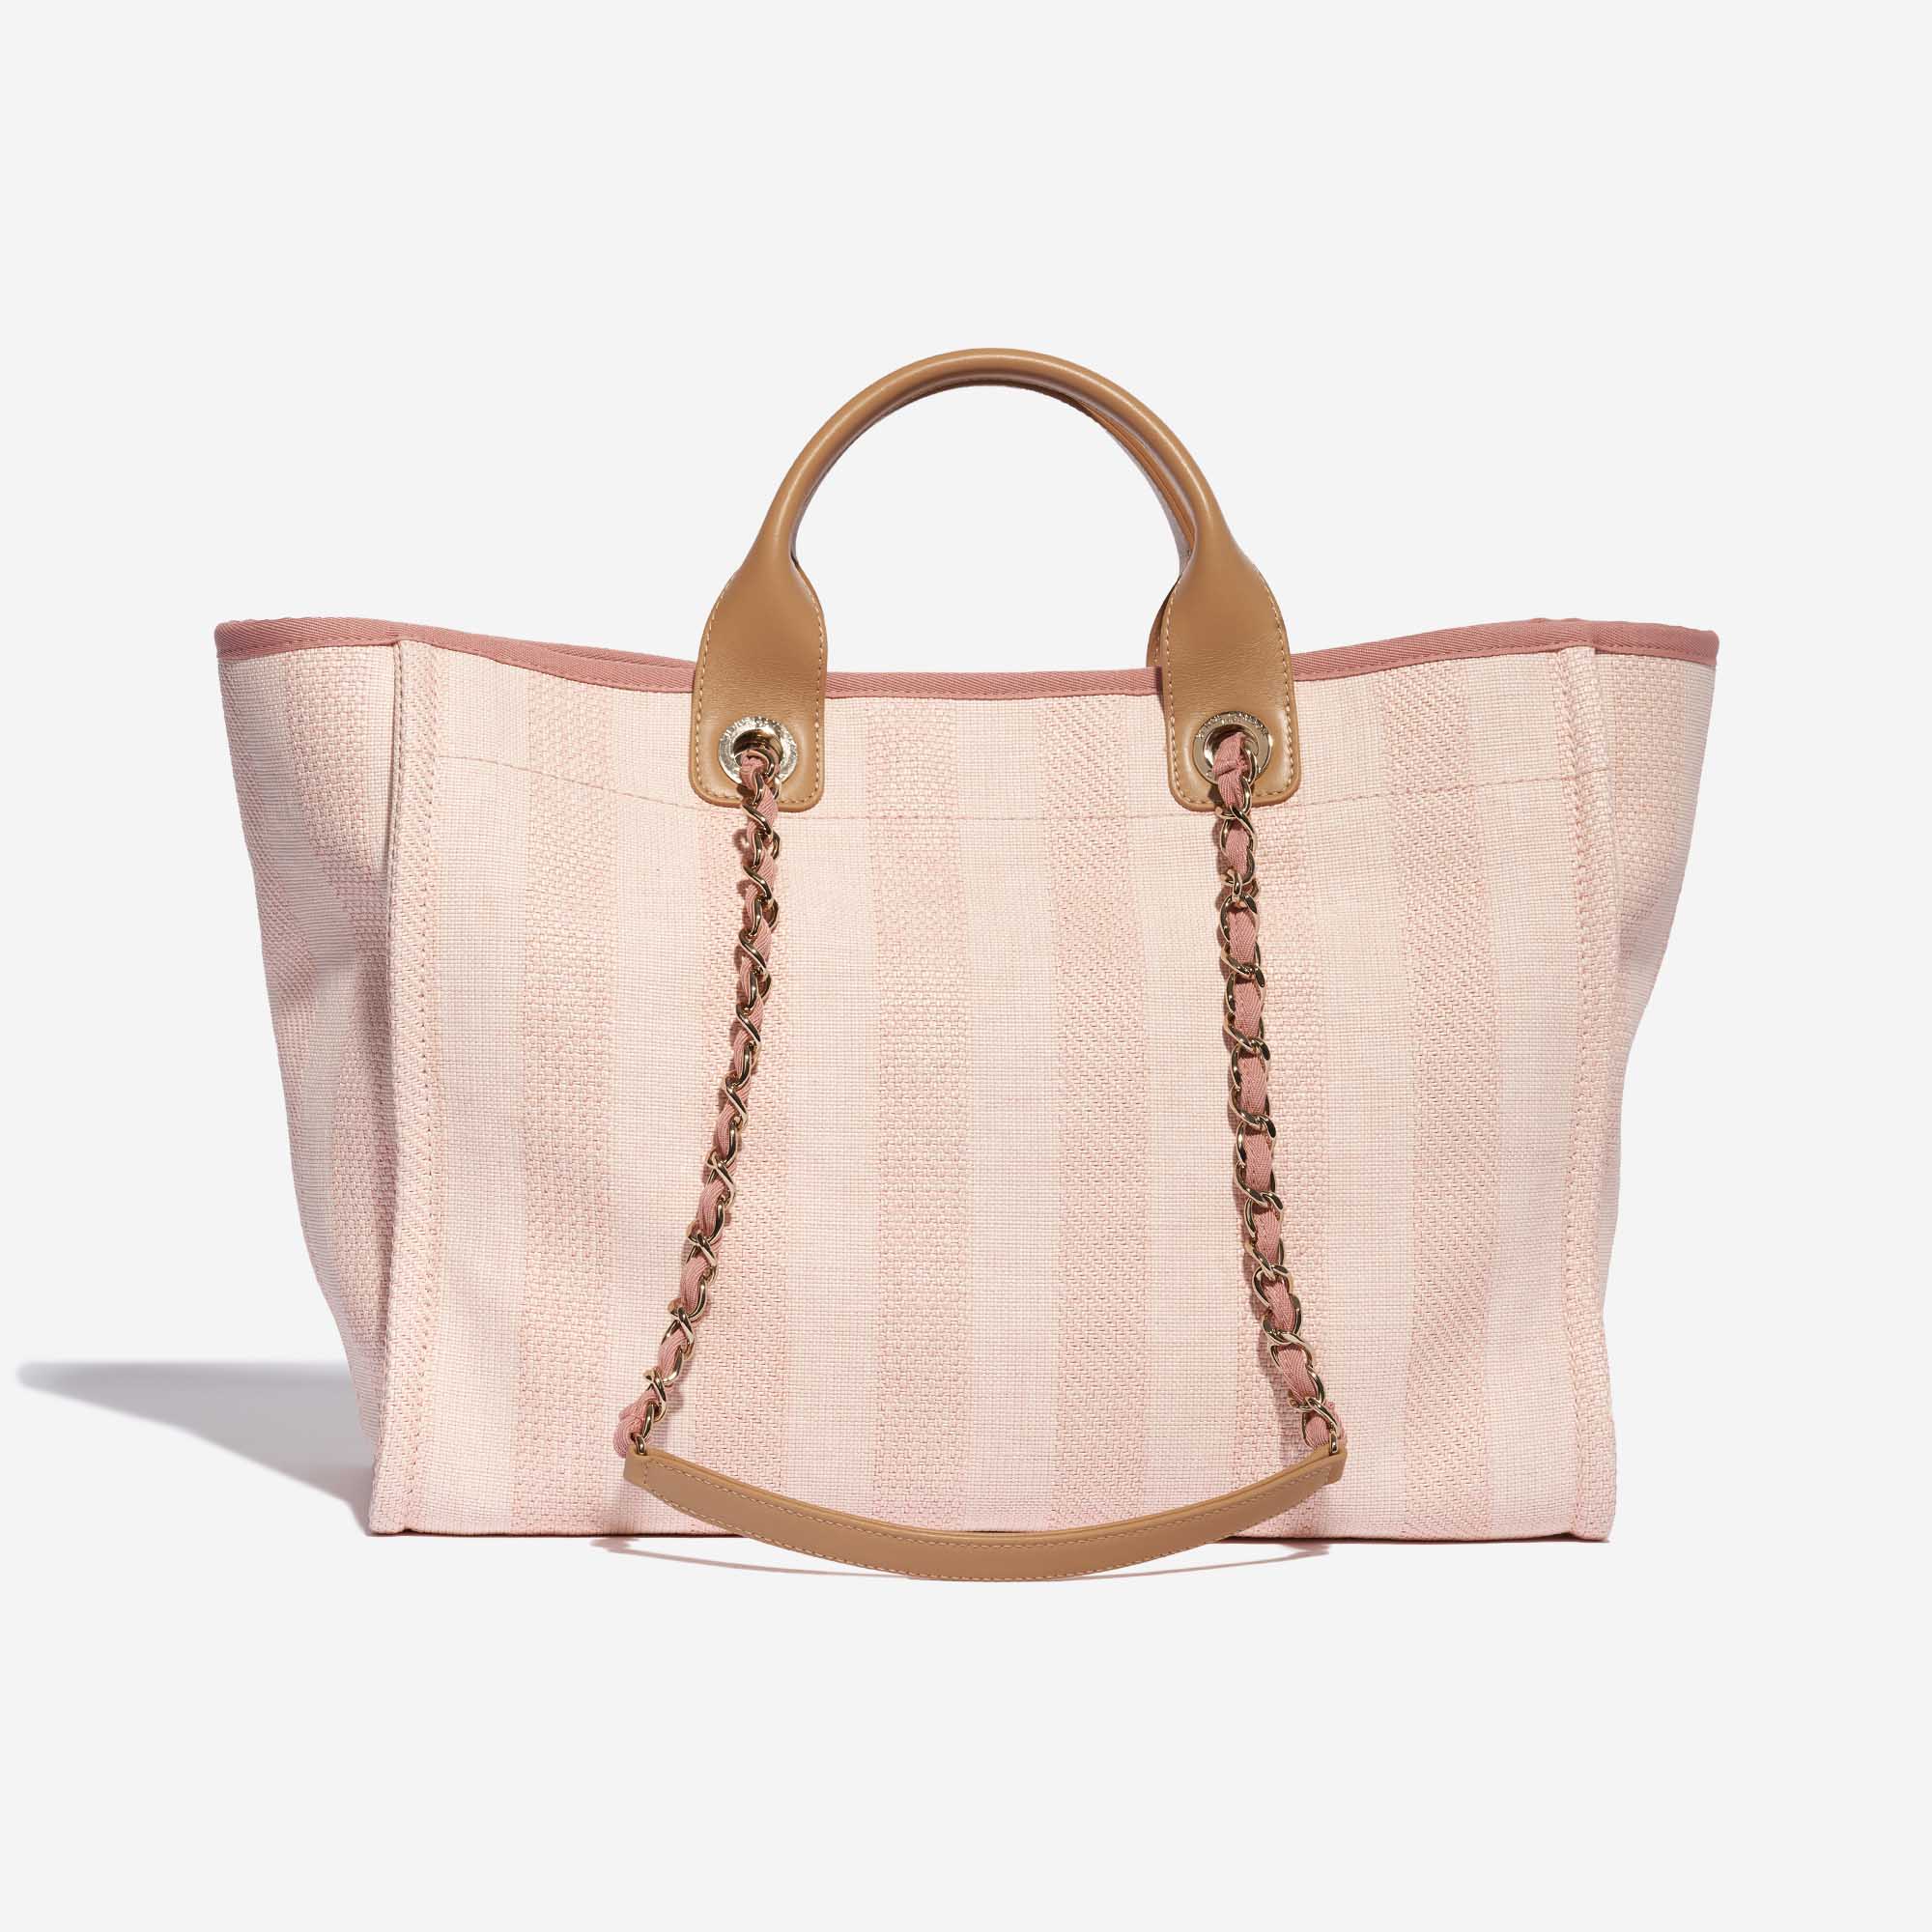 chanel deauville pink tote bag